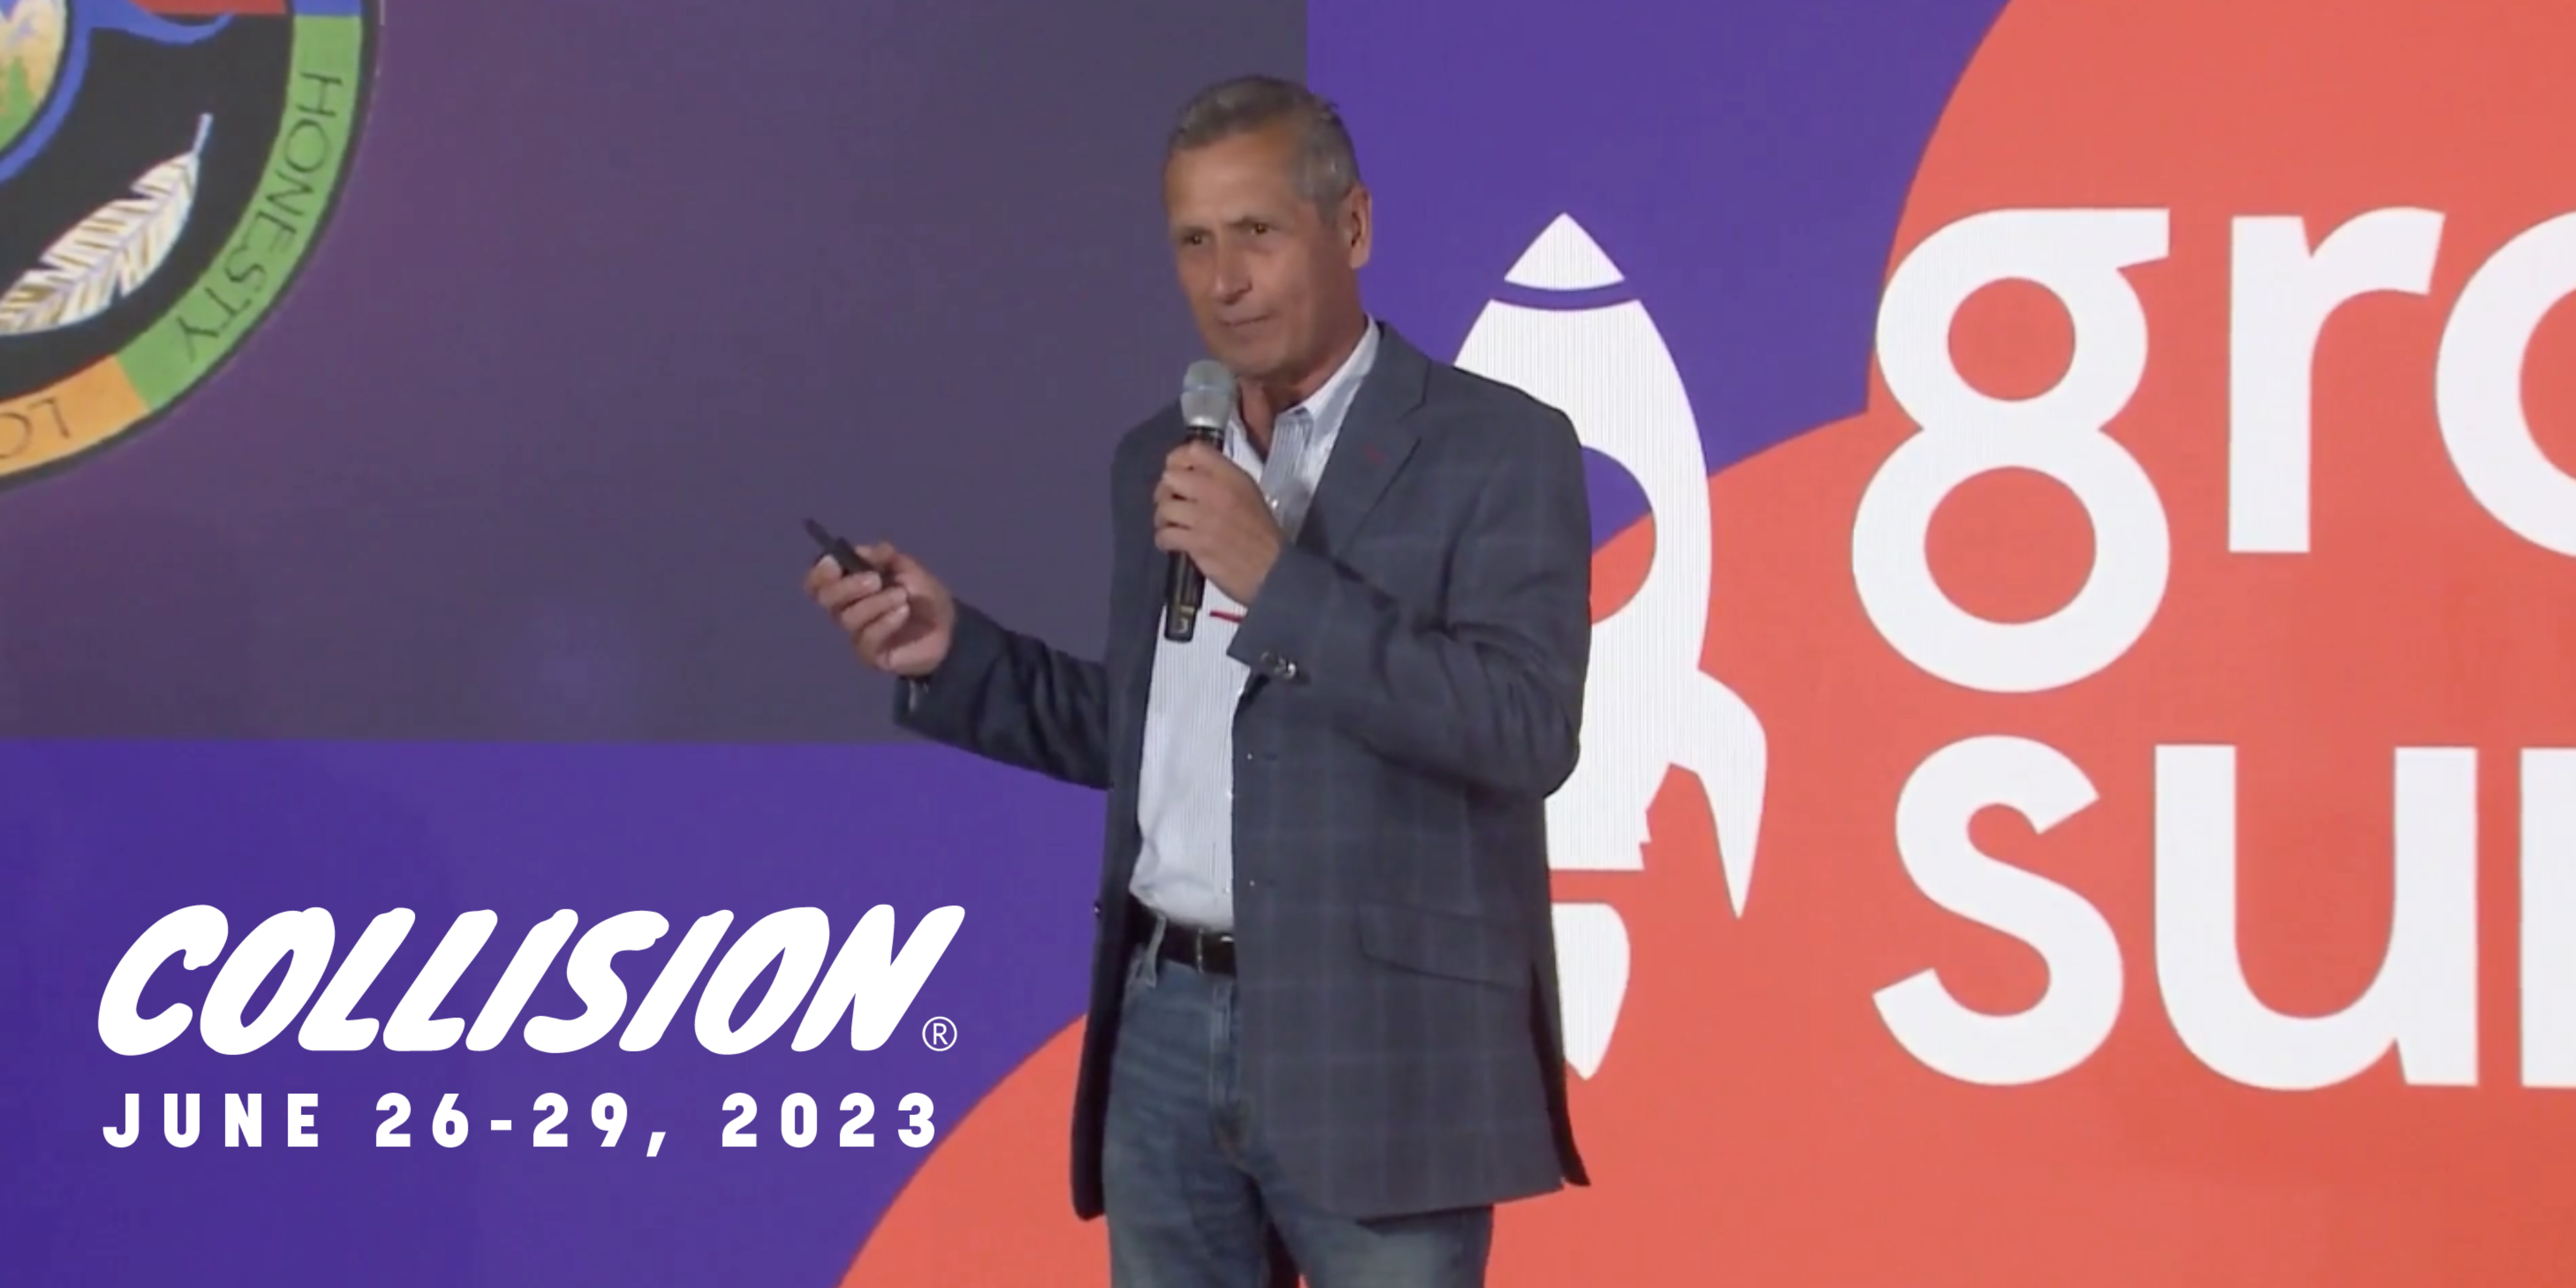 CEO Brian Ritchie Speaks at Collision Conference in Toronto